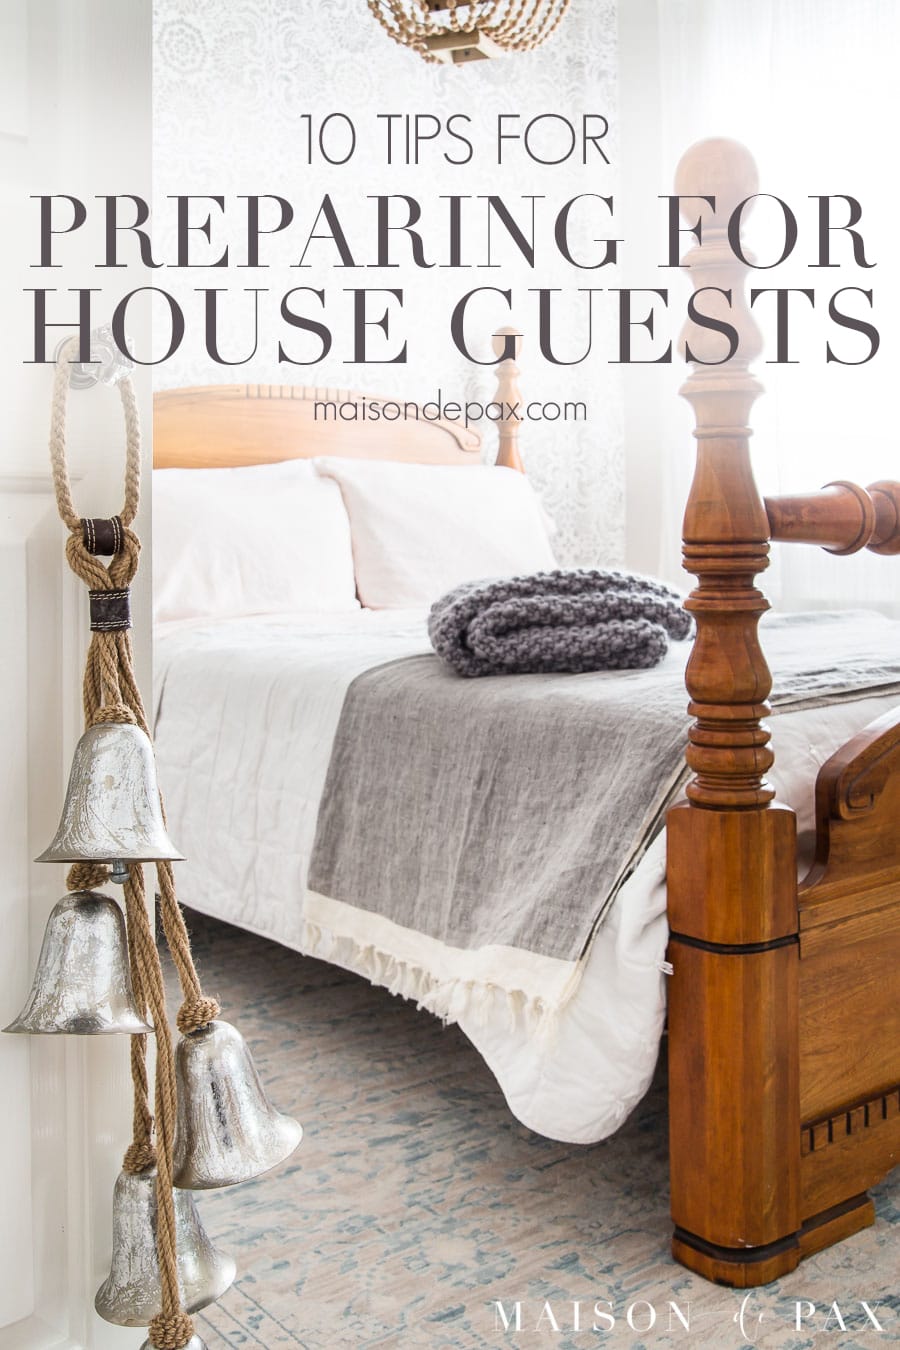 image of bedroom with text overlay that reads "10 tips for preparing for house guests"